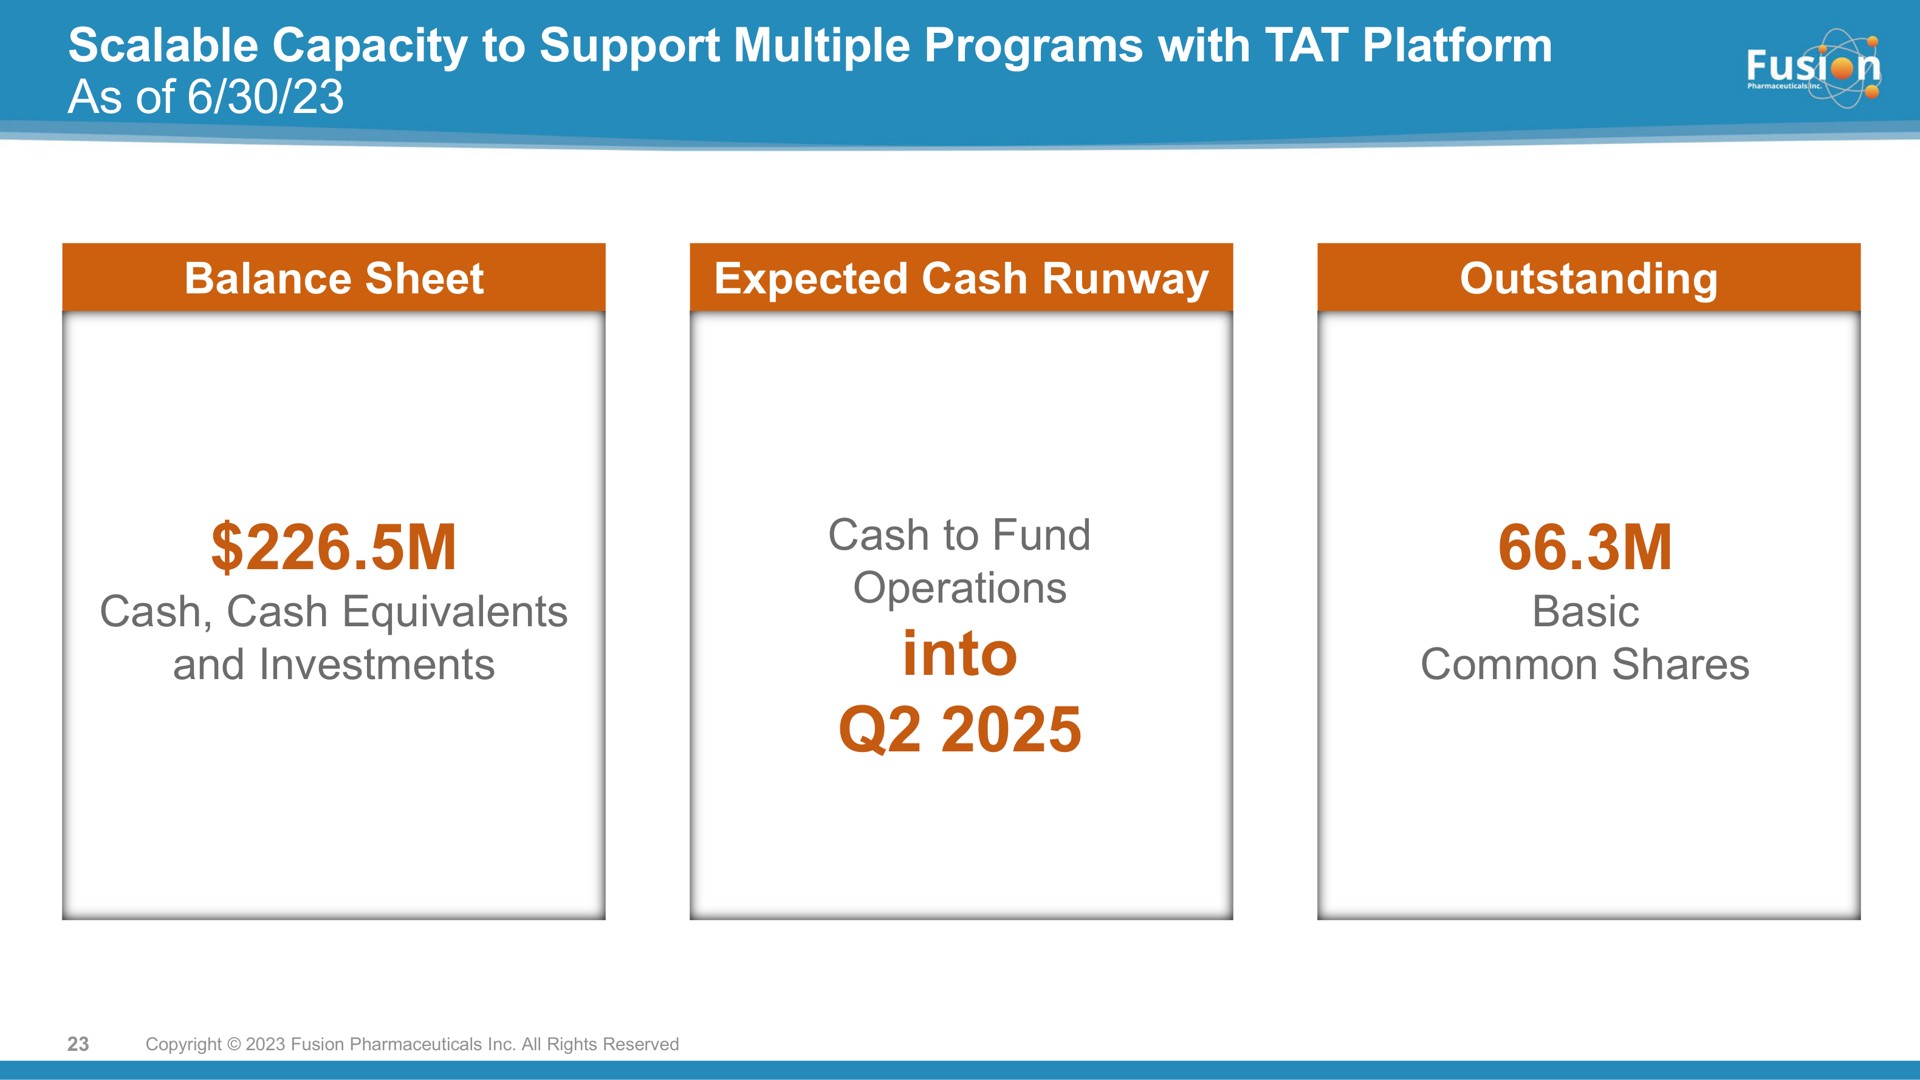 scalable capacity to support multiple programs with tat platform as of balance sheet expected cash runway outstanding cash cash equivalents and investments cash to fund operations into basic common shares gen puna | Fusion Pharmaceuticals